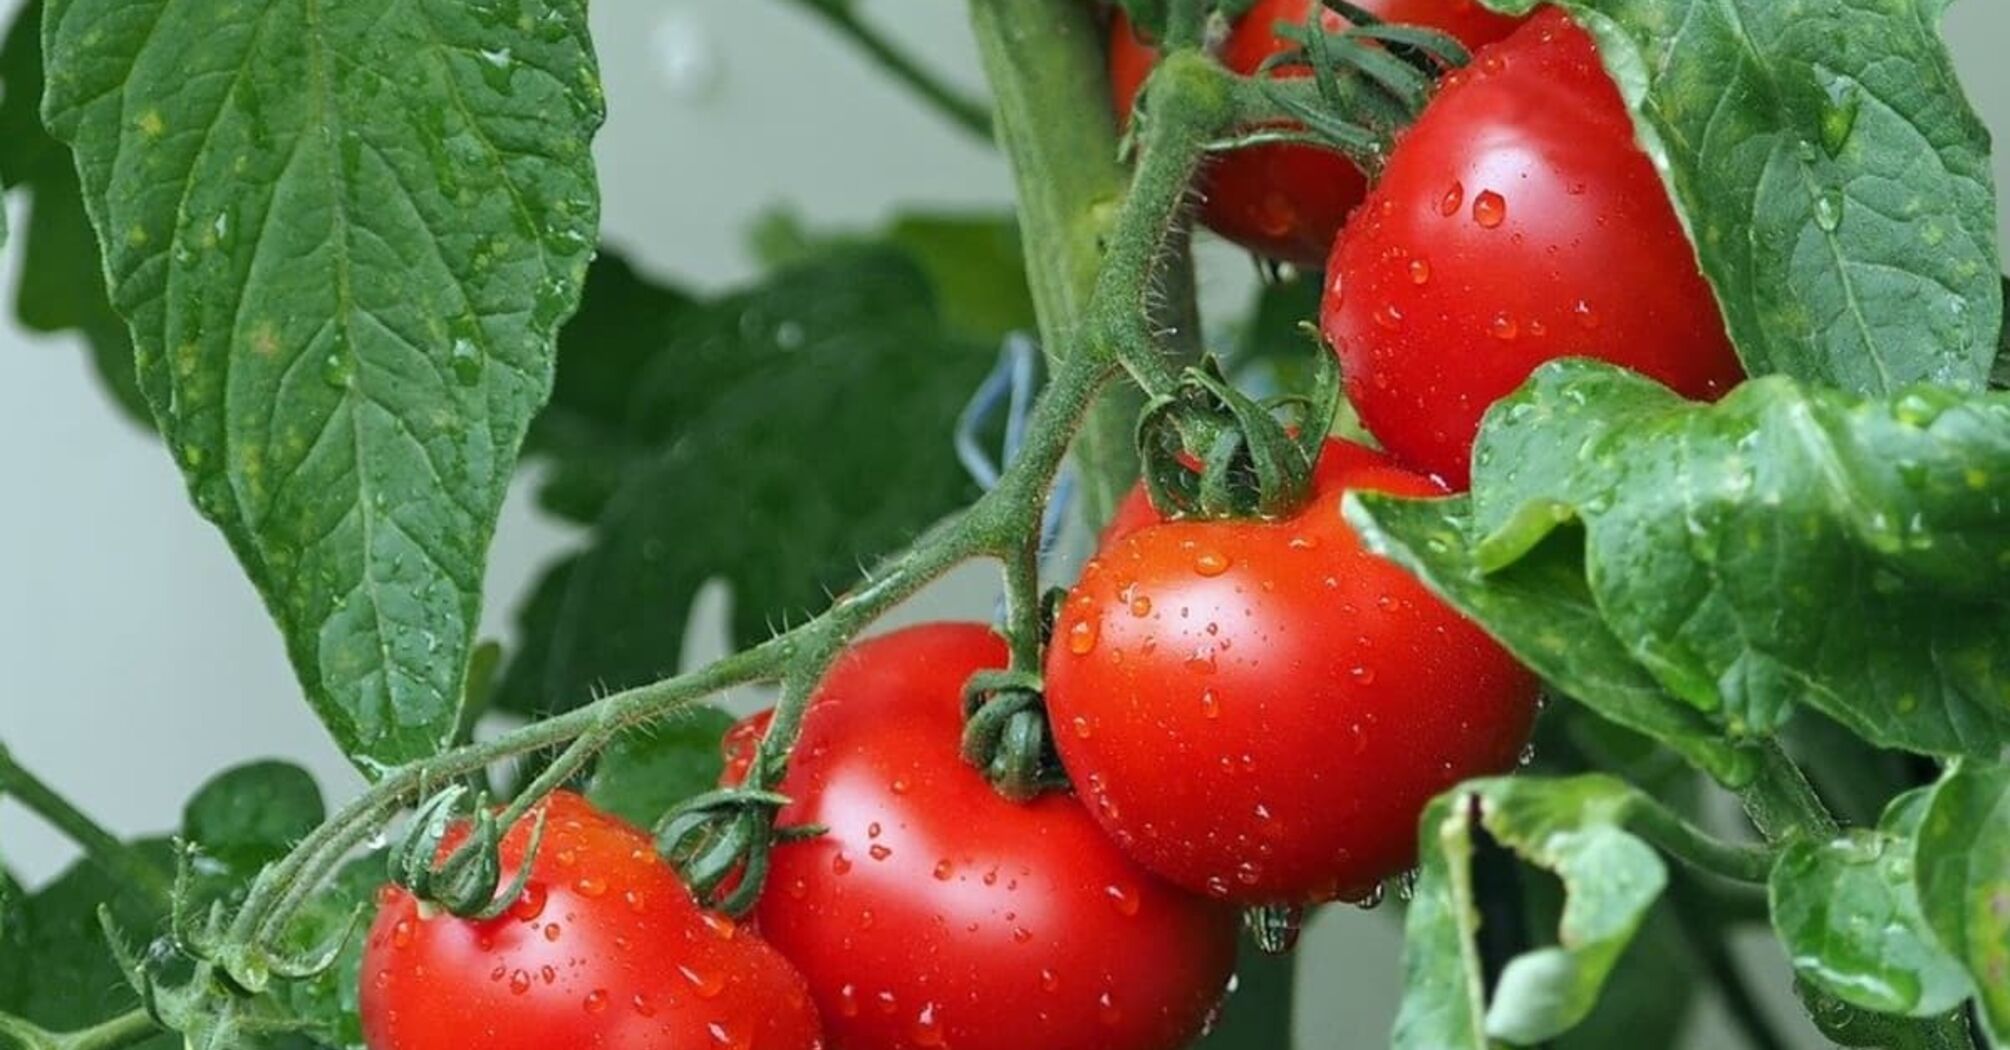 What green manure to sow for tomatoes